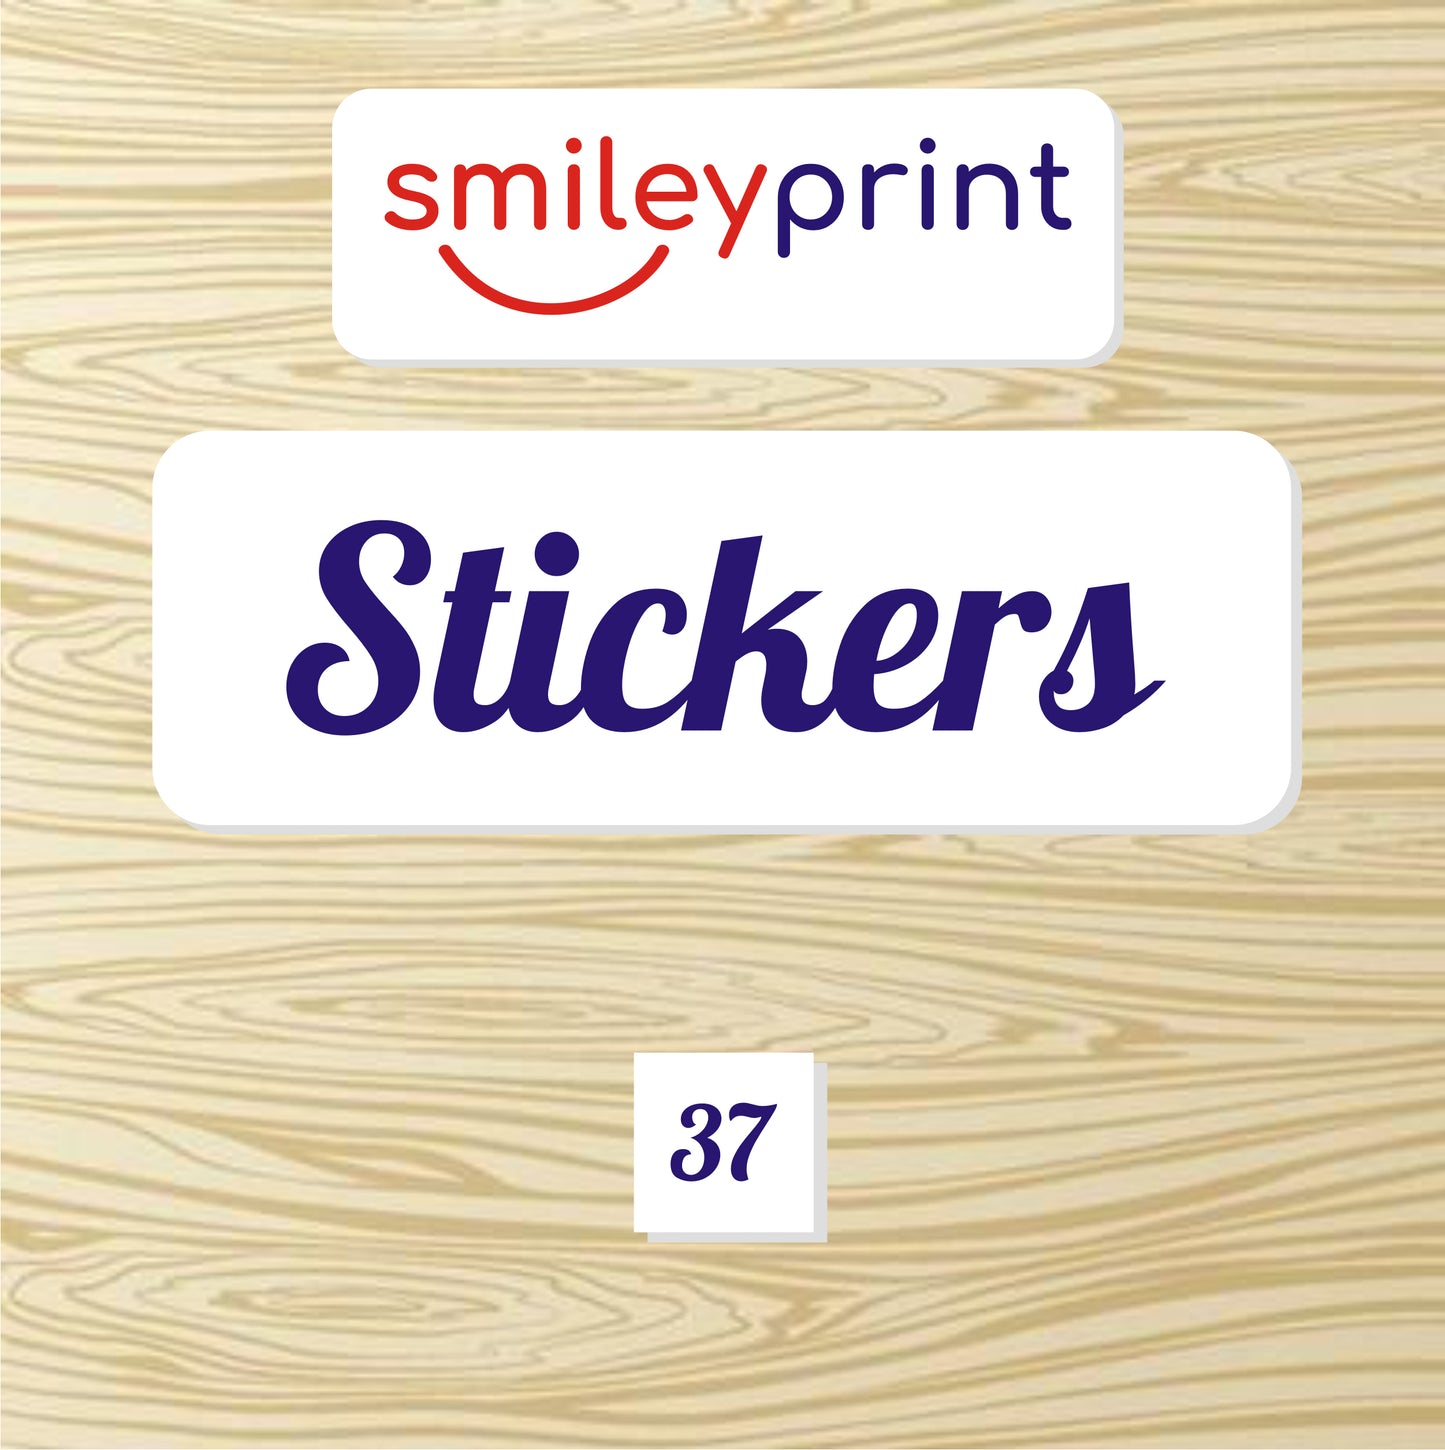 Stickers | Smileyprint.co.uk